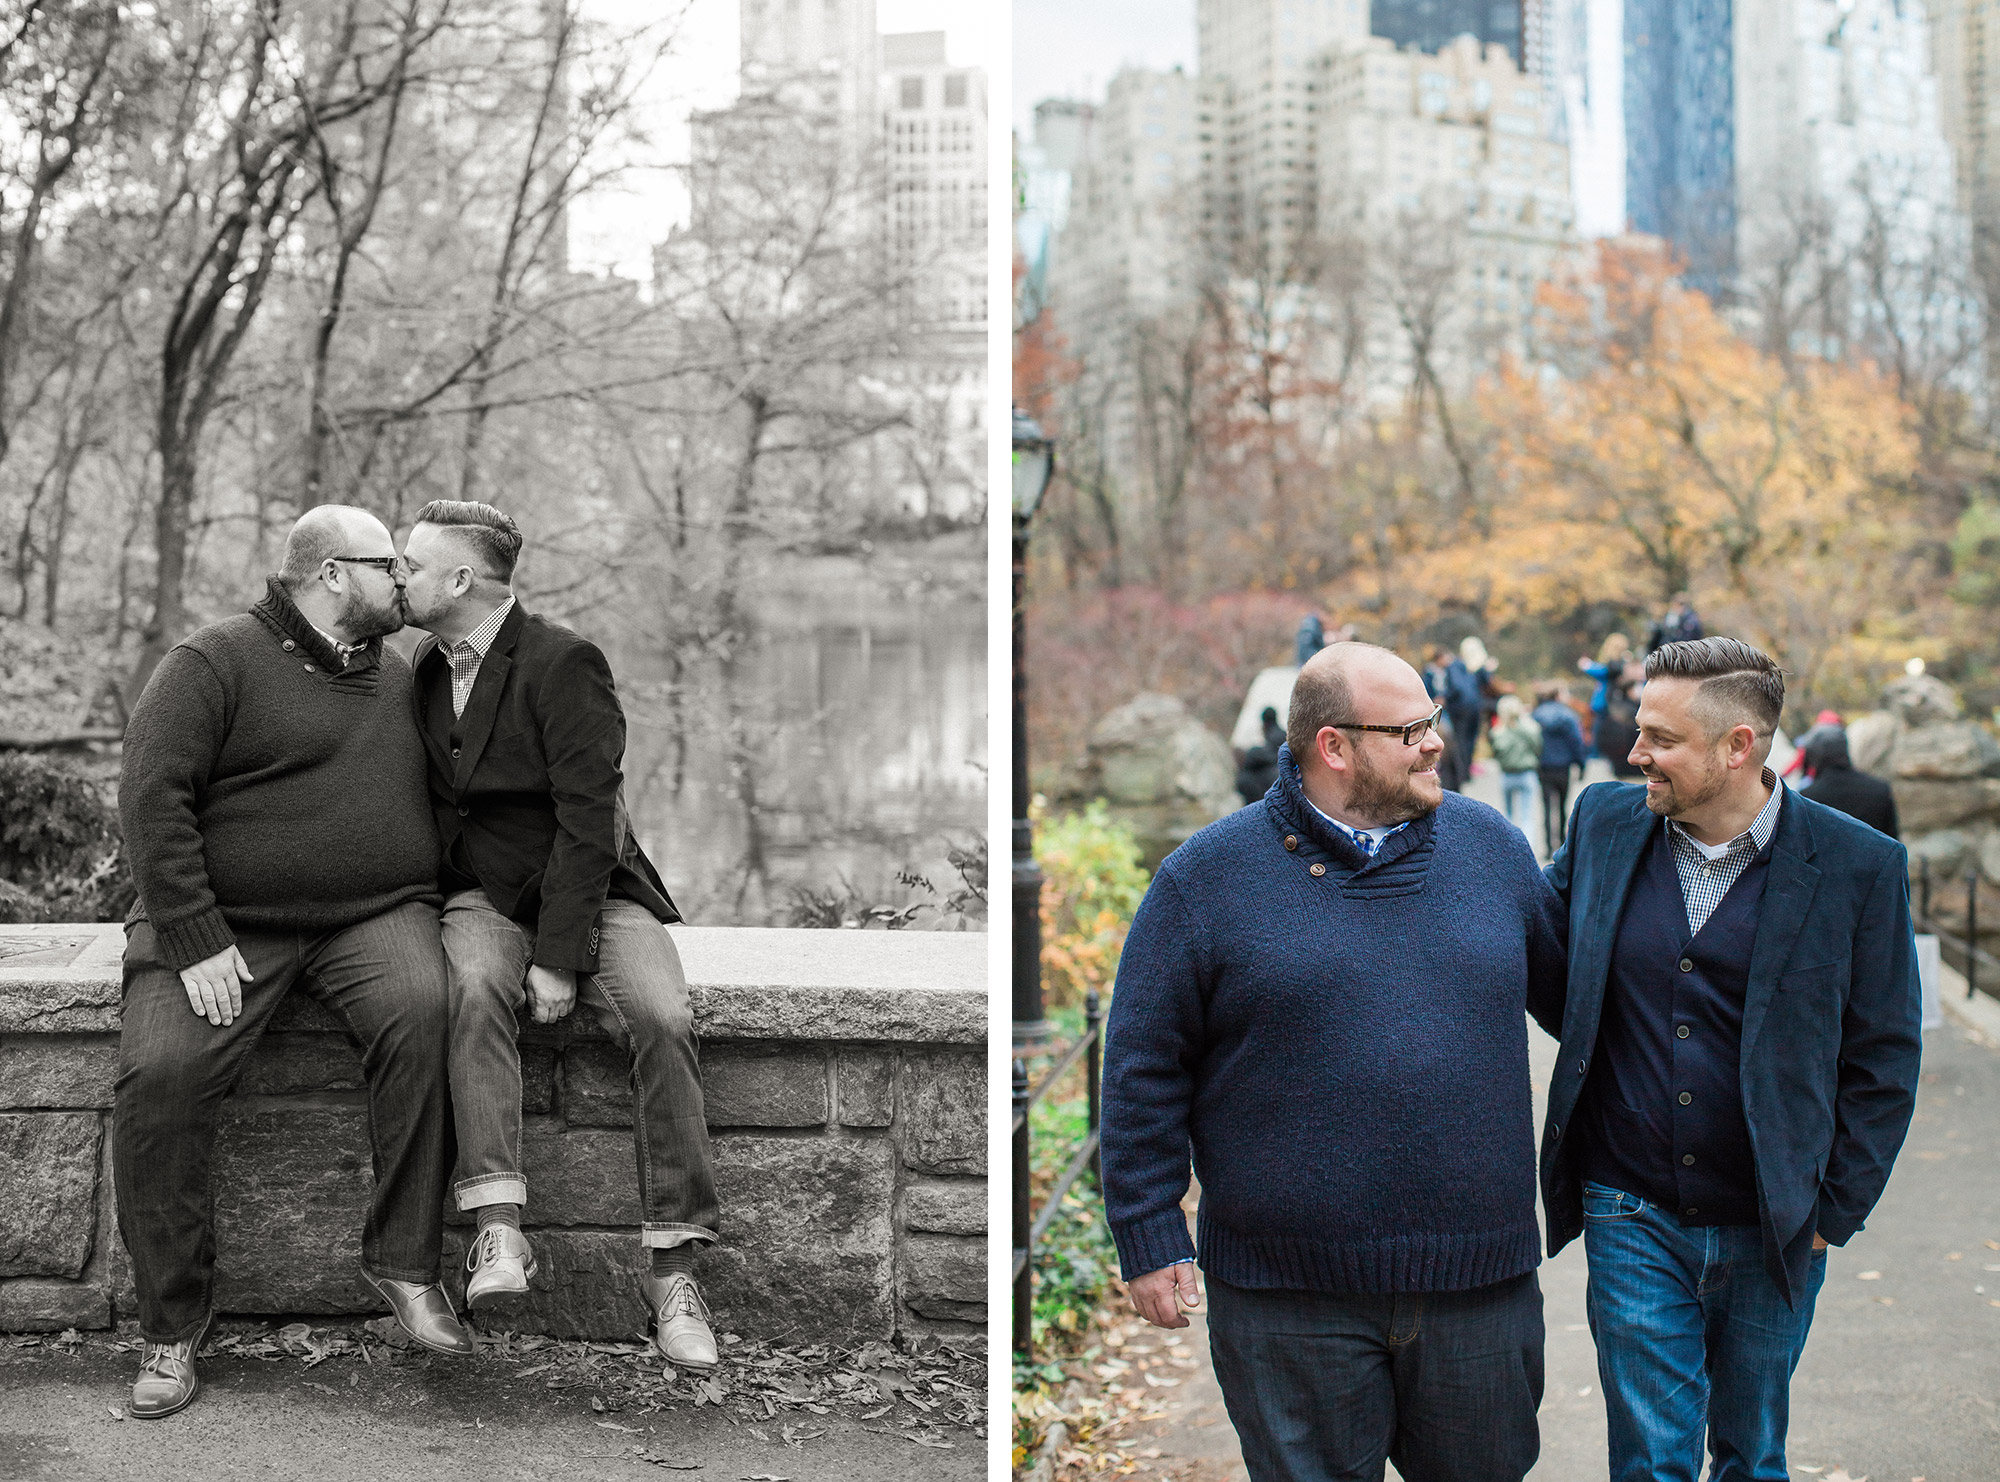 Same sex elopement in Central Park. Photos by Kelly Kollar Photography.